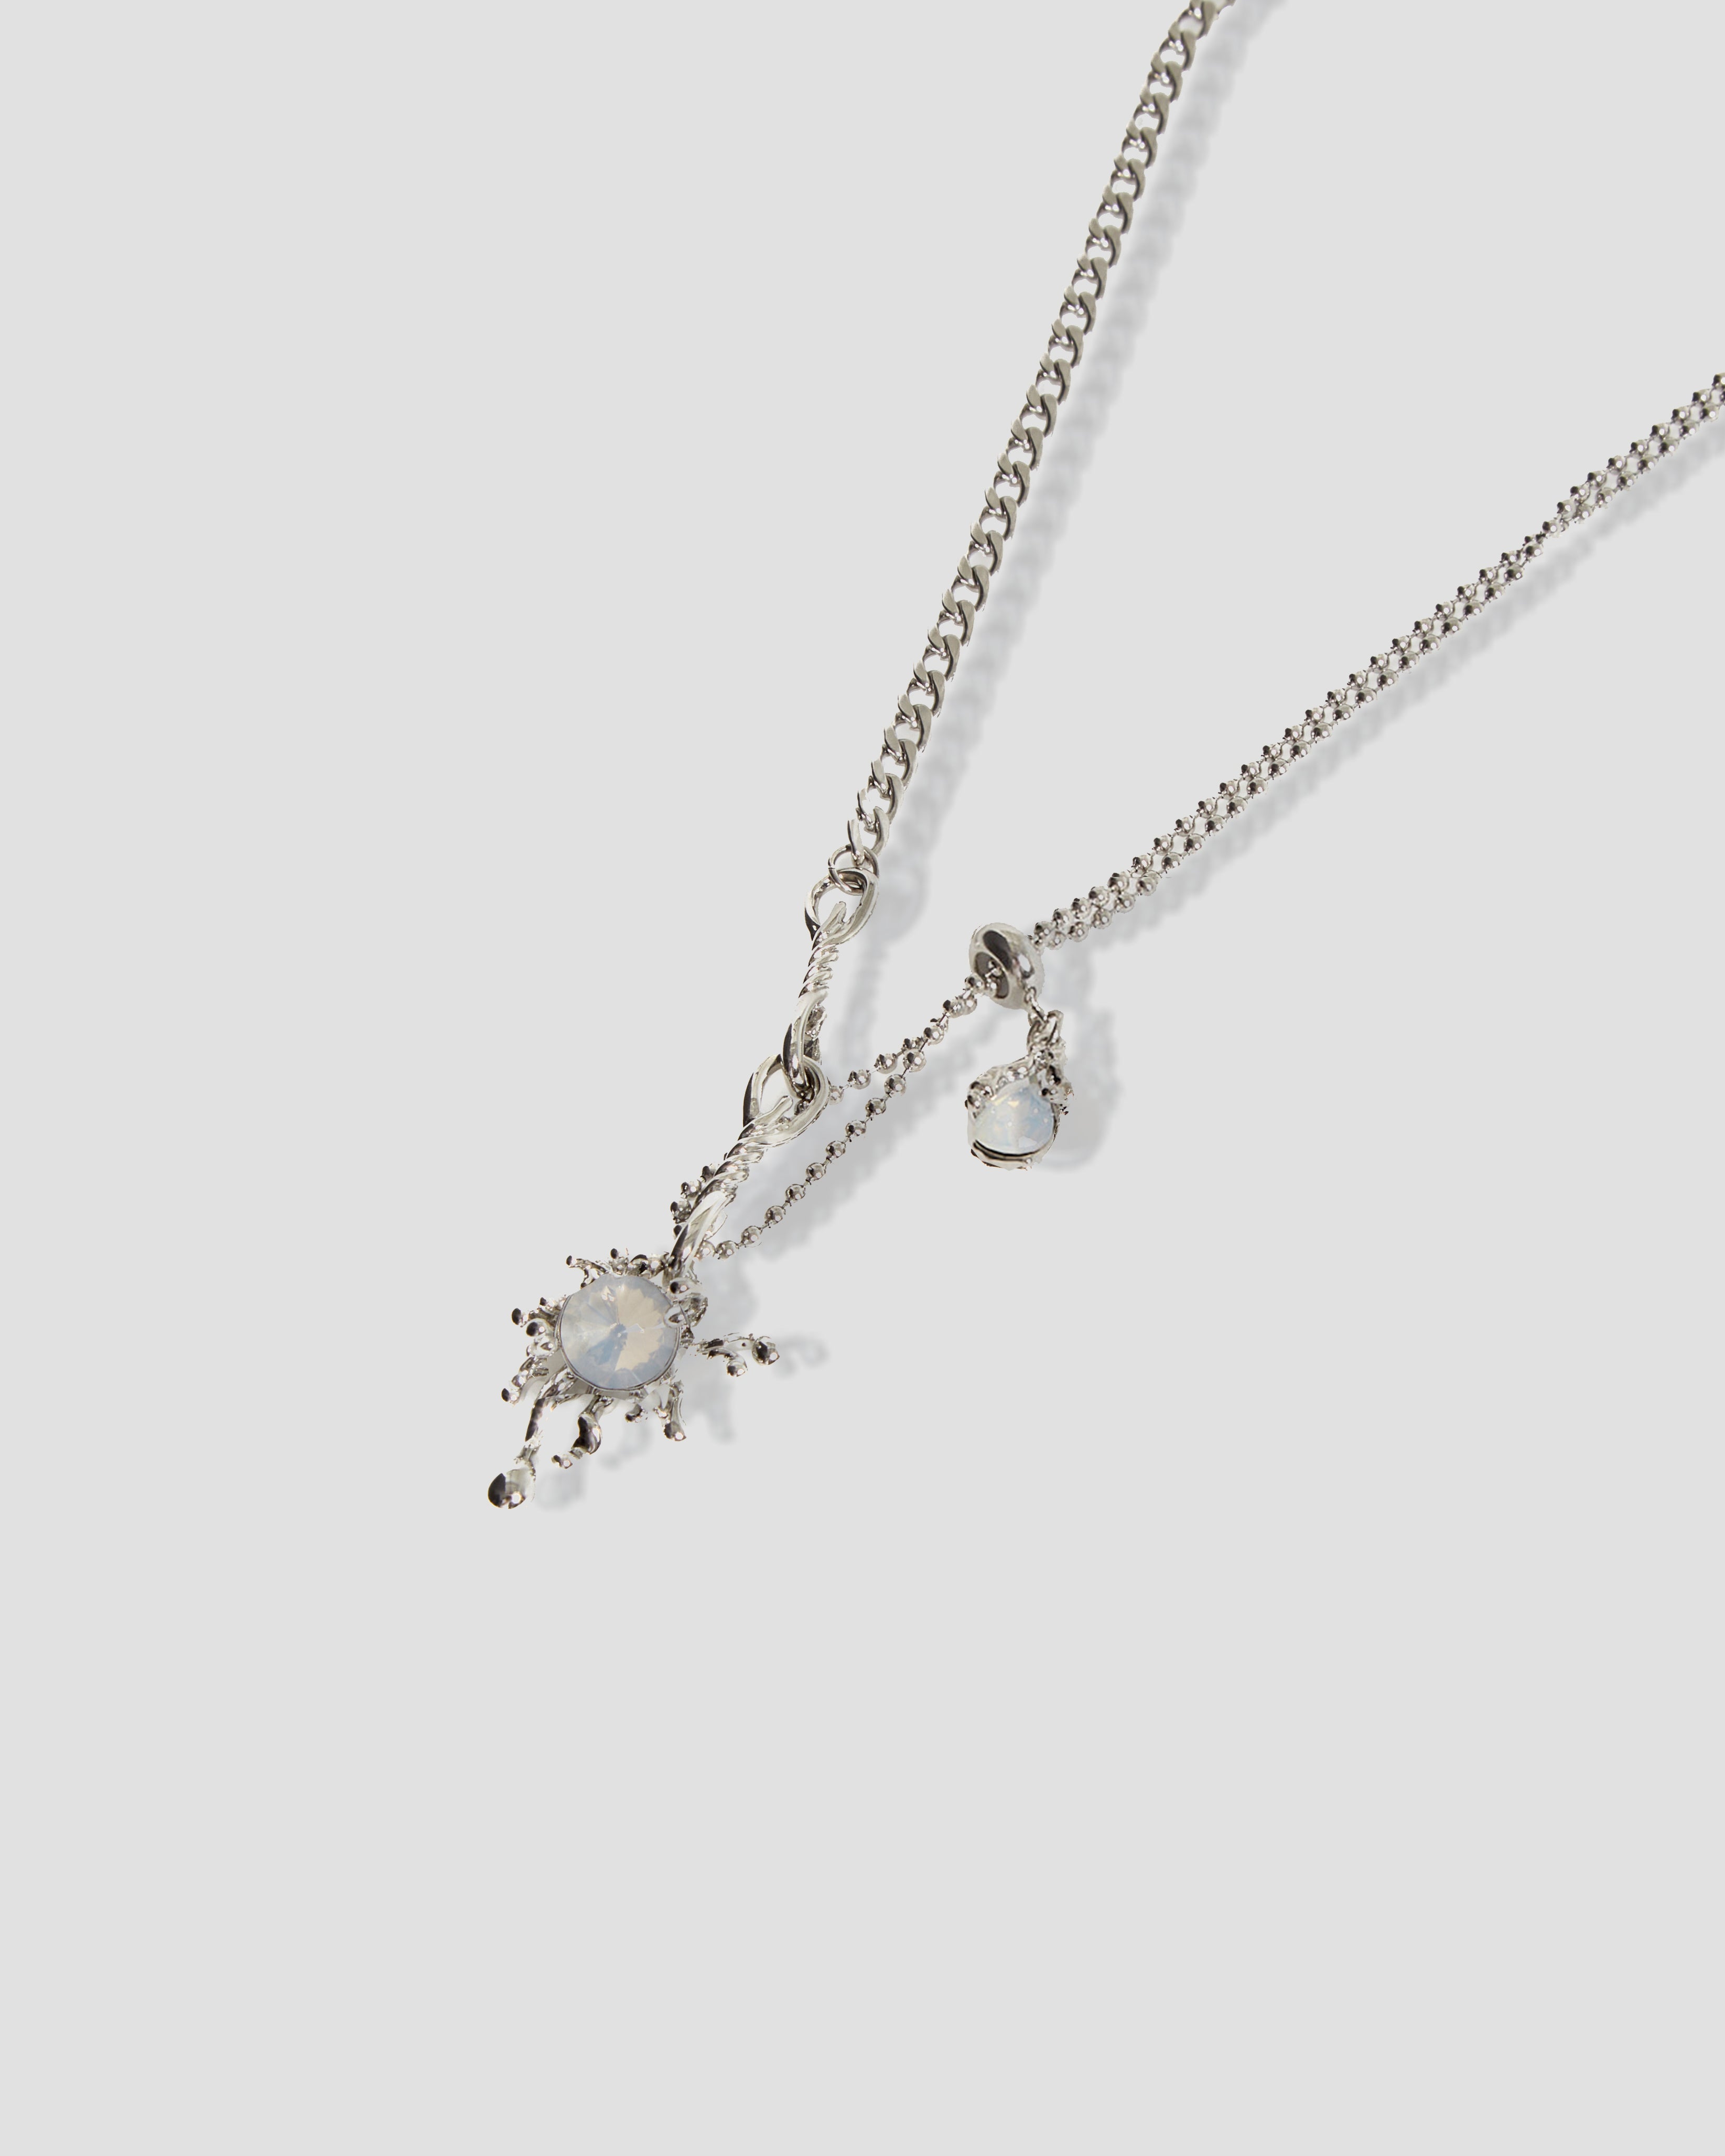 Recoil Ball Chain Necklace With Moonstone Charms in Silver